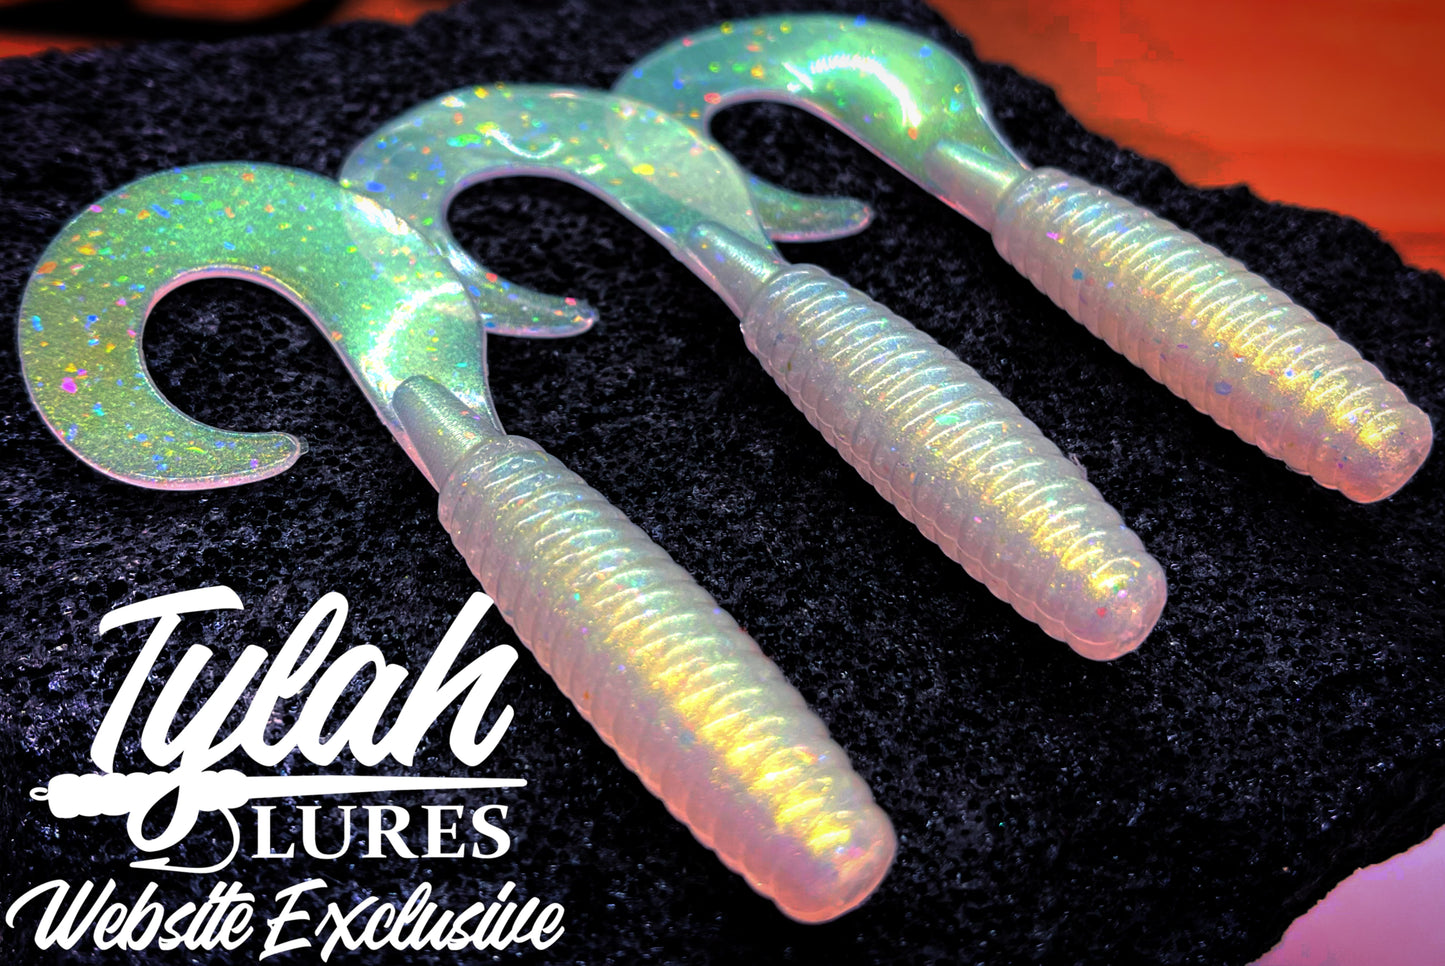 TylahLures Website Exclusive 5 inch Big TylahTail